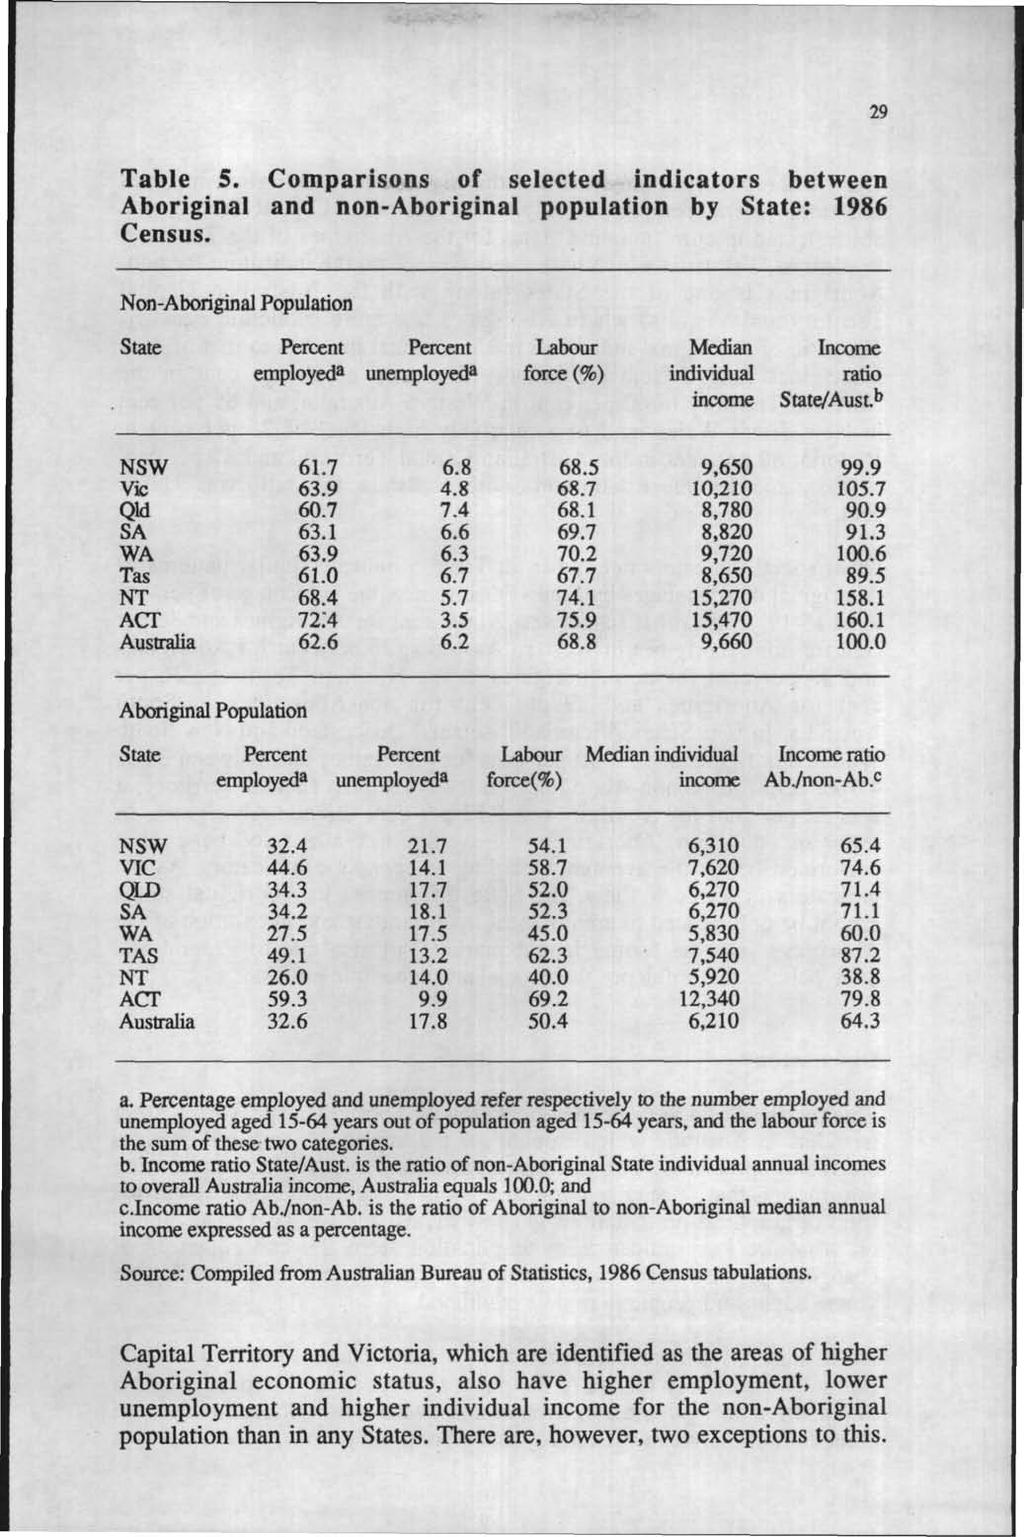 29 Table 5. Comparisons of selected indicators between Aboriginal and non-aboriginal population by State: 1986 Census.